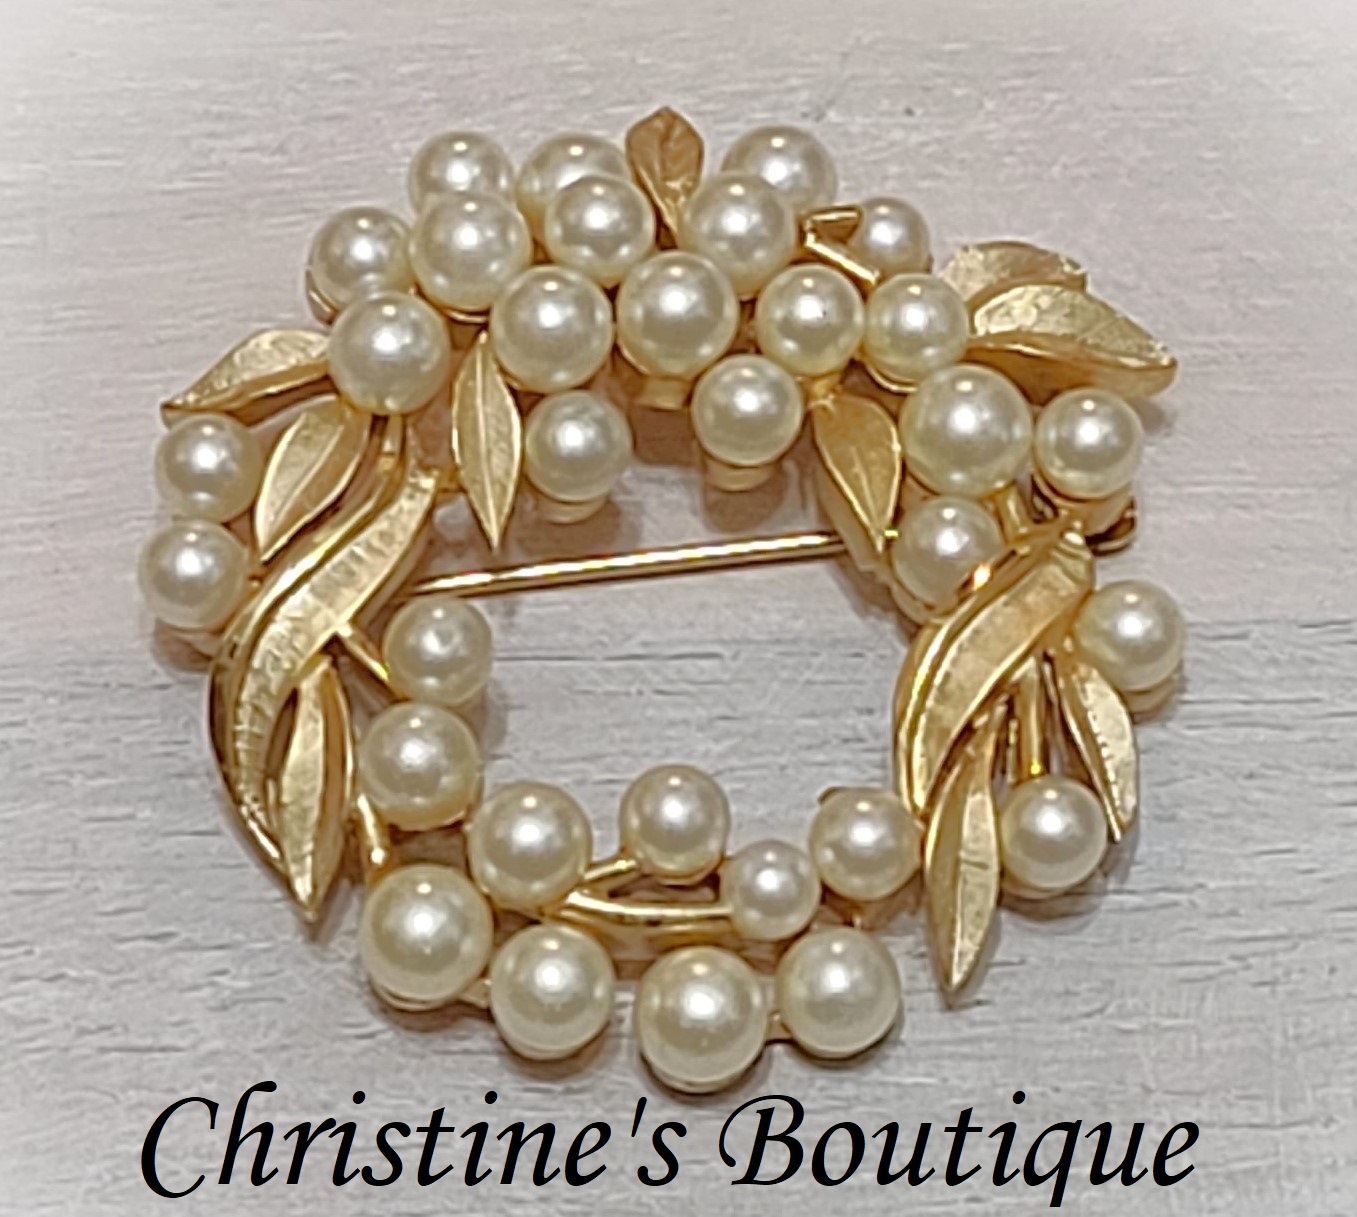 Wreath pin with leaves and pearls